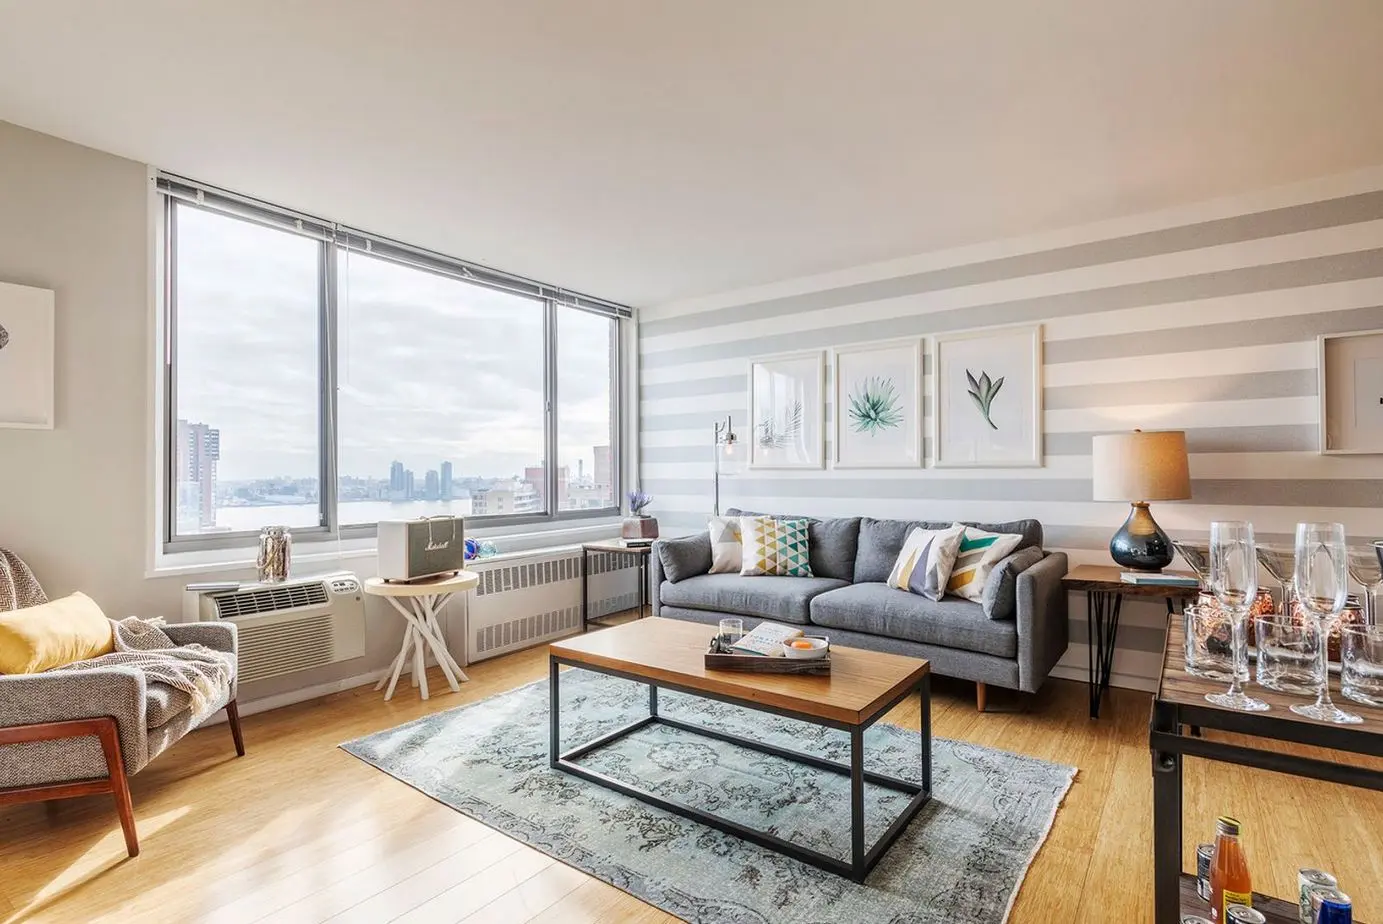 Kips Bay Court 520 Second Avenue NYC Rental Apartments CityRealty